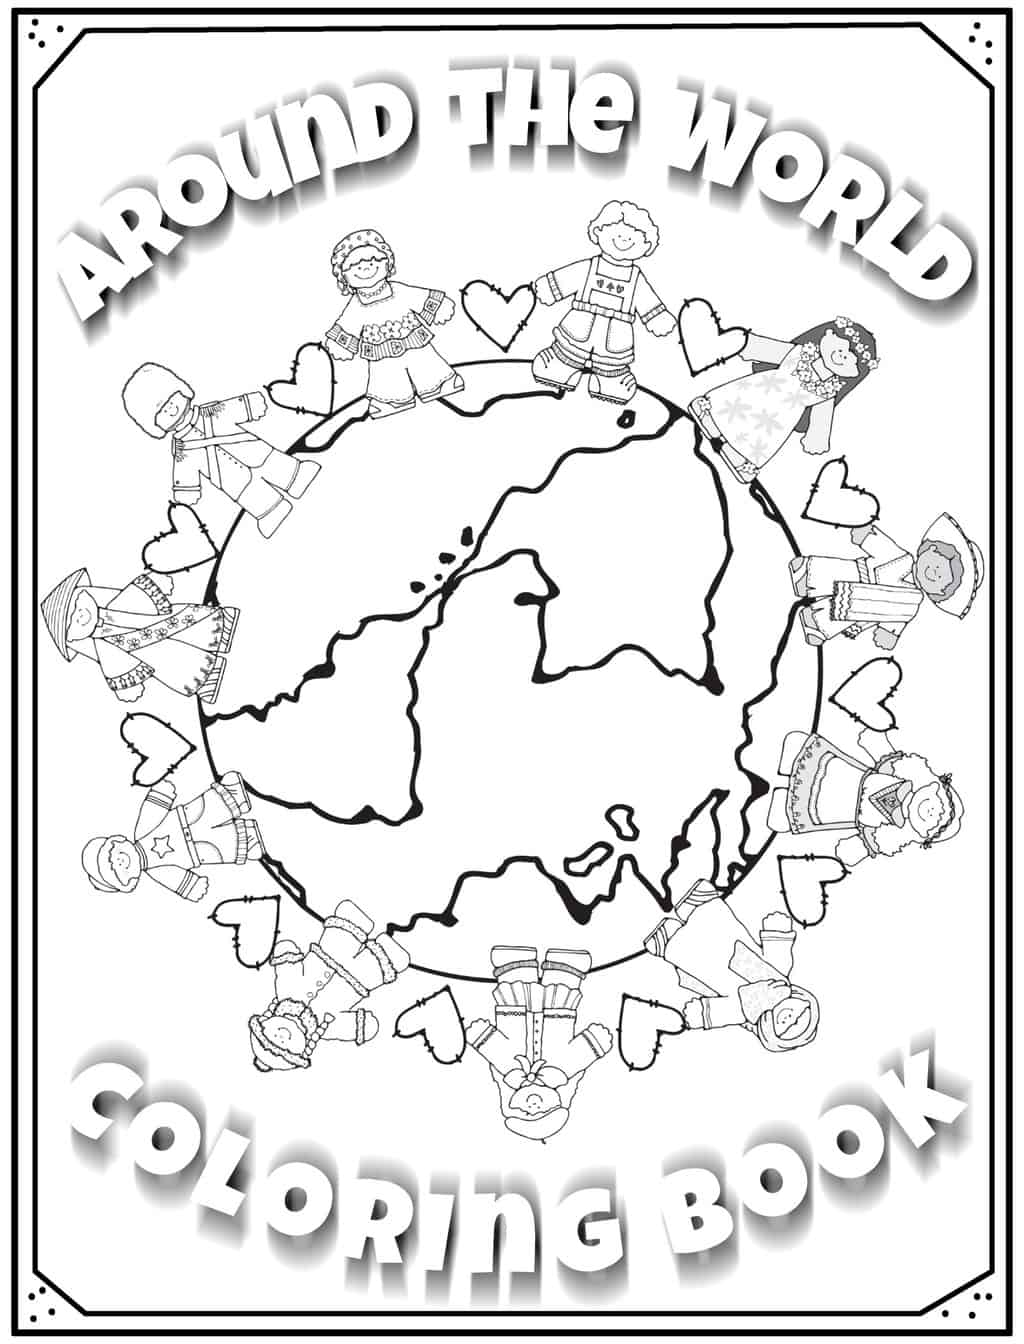 Read, Color & Learn Country Coloring Pages